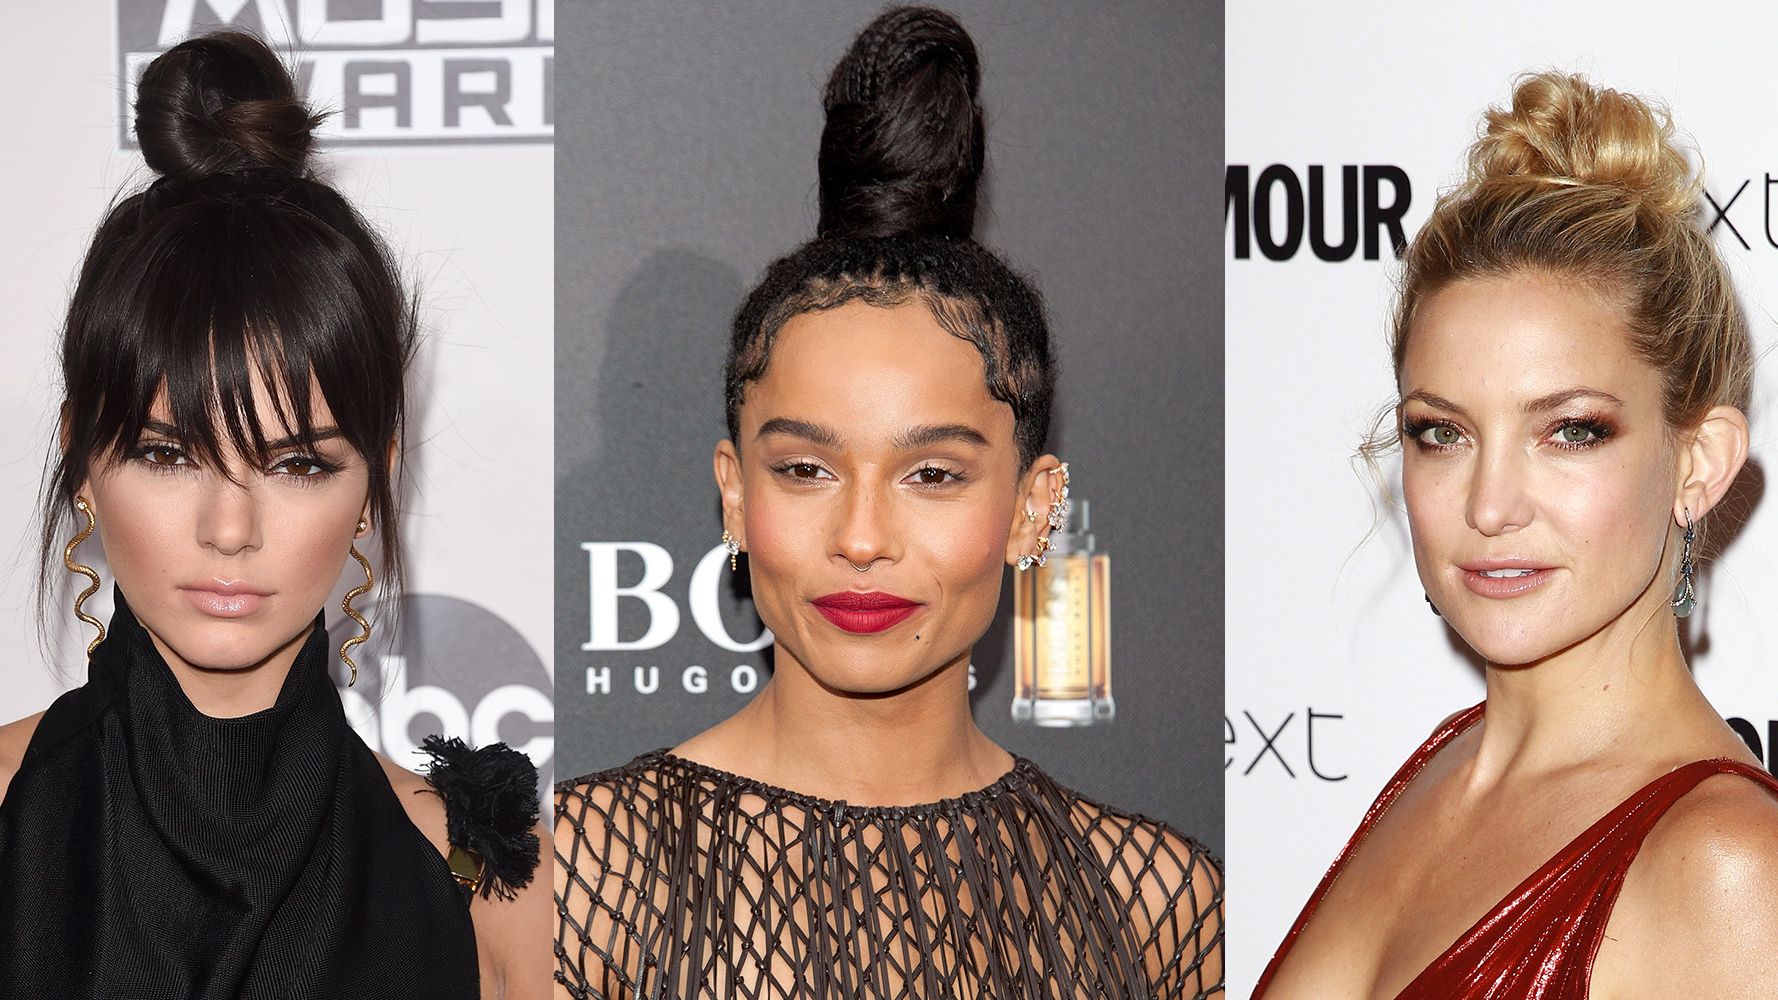 renovere samtale lejlighed 50 Best Top Knot Hairstyles of 2017 - Celebrity Top Knot Ideas | Marie  Claire